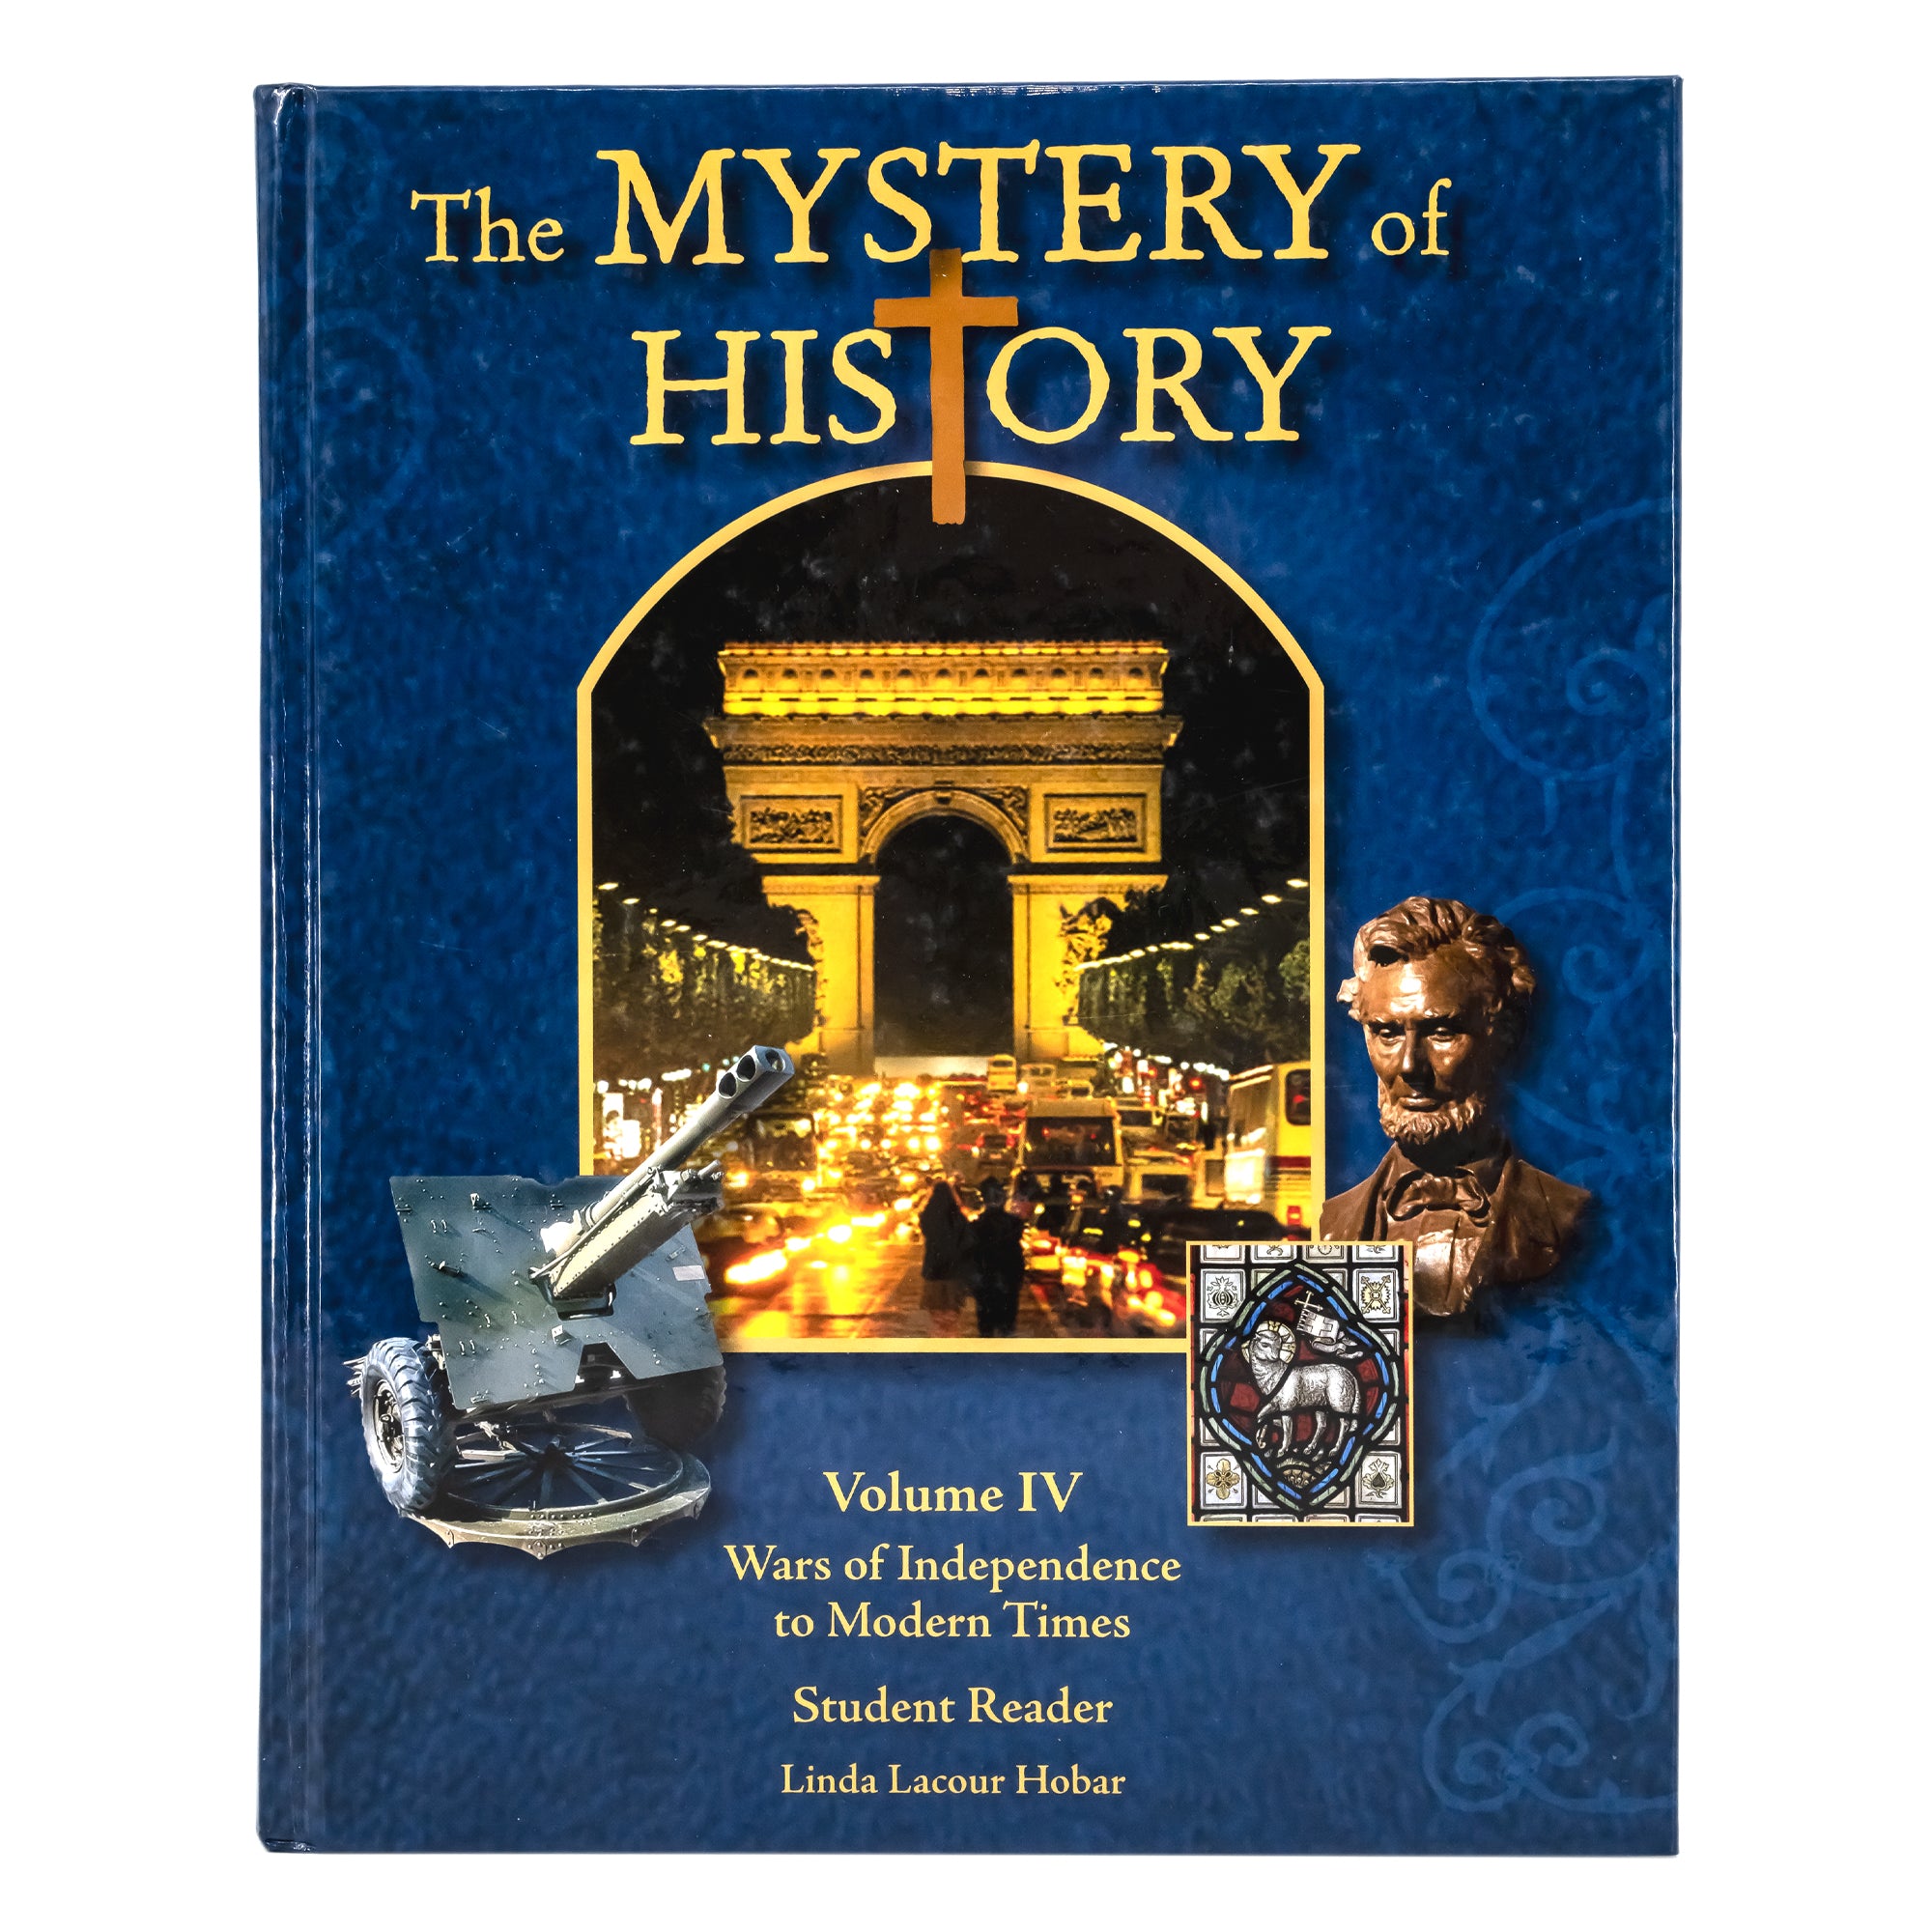 The Mystery of History volume 4 book cover. It is dark blue colored with lighter swirls. In the middle is a framed photo of the Arc De Triomphe lit up in the dark night by lights and cars driving near. On the sides of the main photo are 3 images, including; a cannon gun, The Lamb of God stained glass window located in the Somerset Withiel Florey Church, and a bronze Lincoln bust statue.